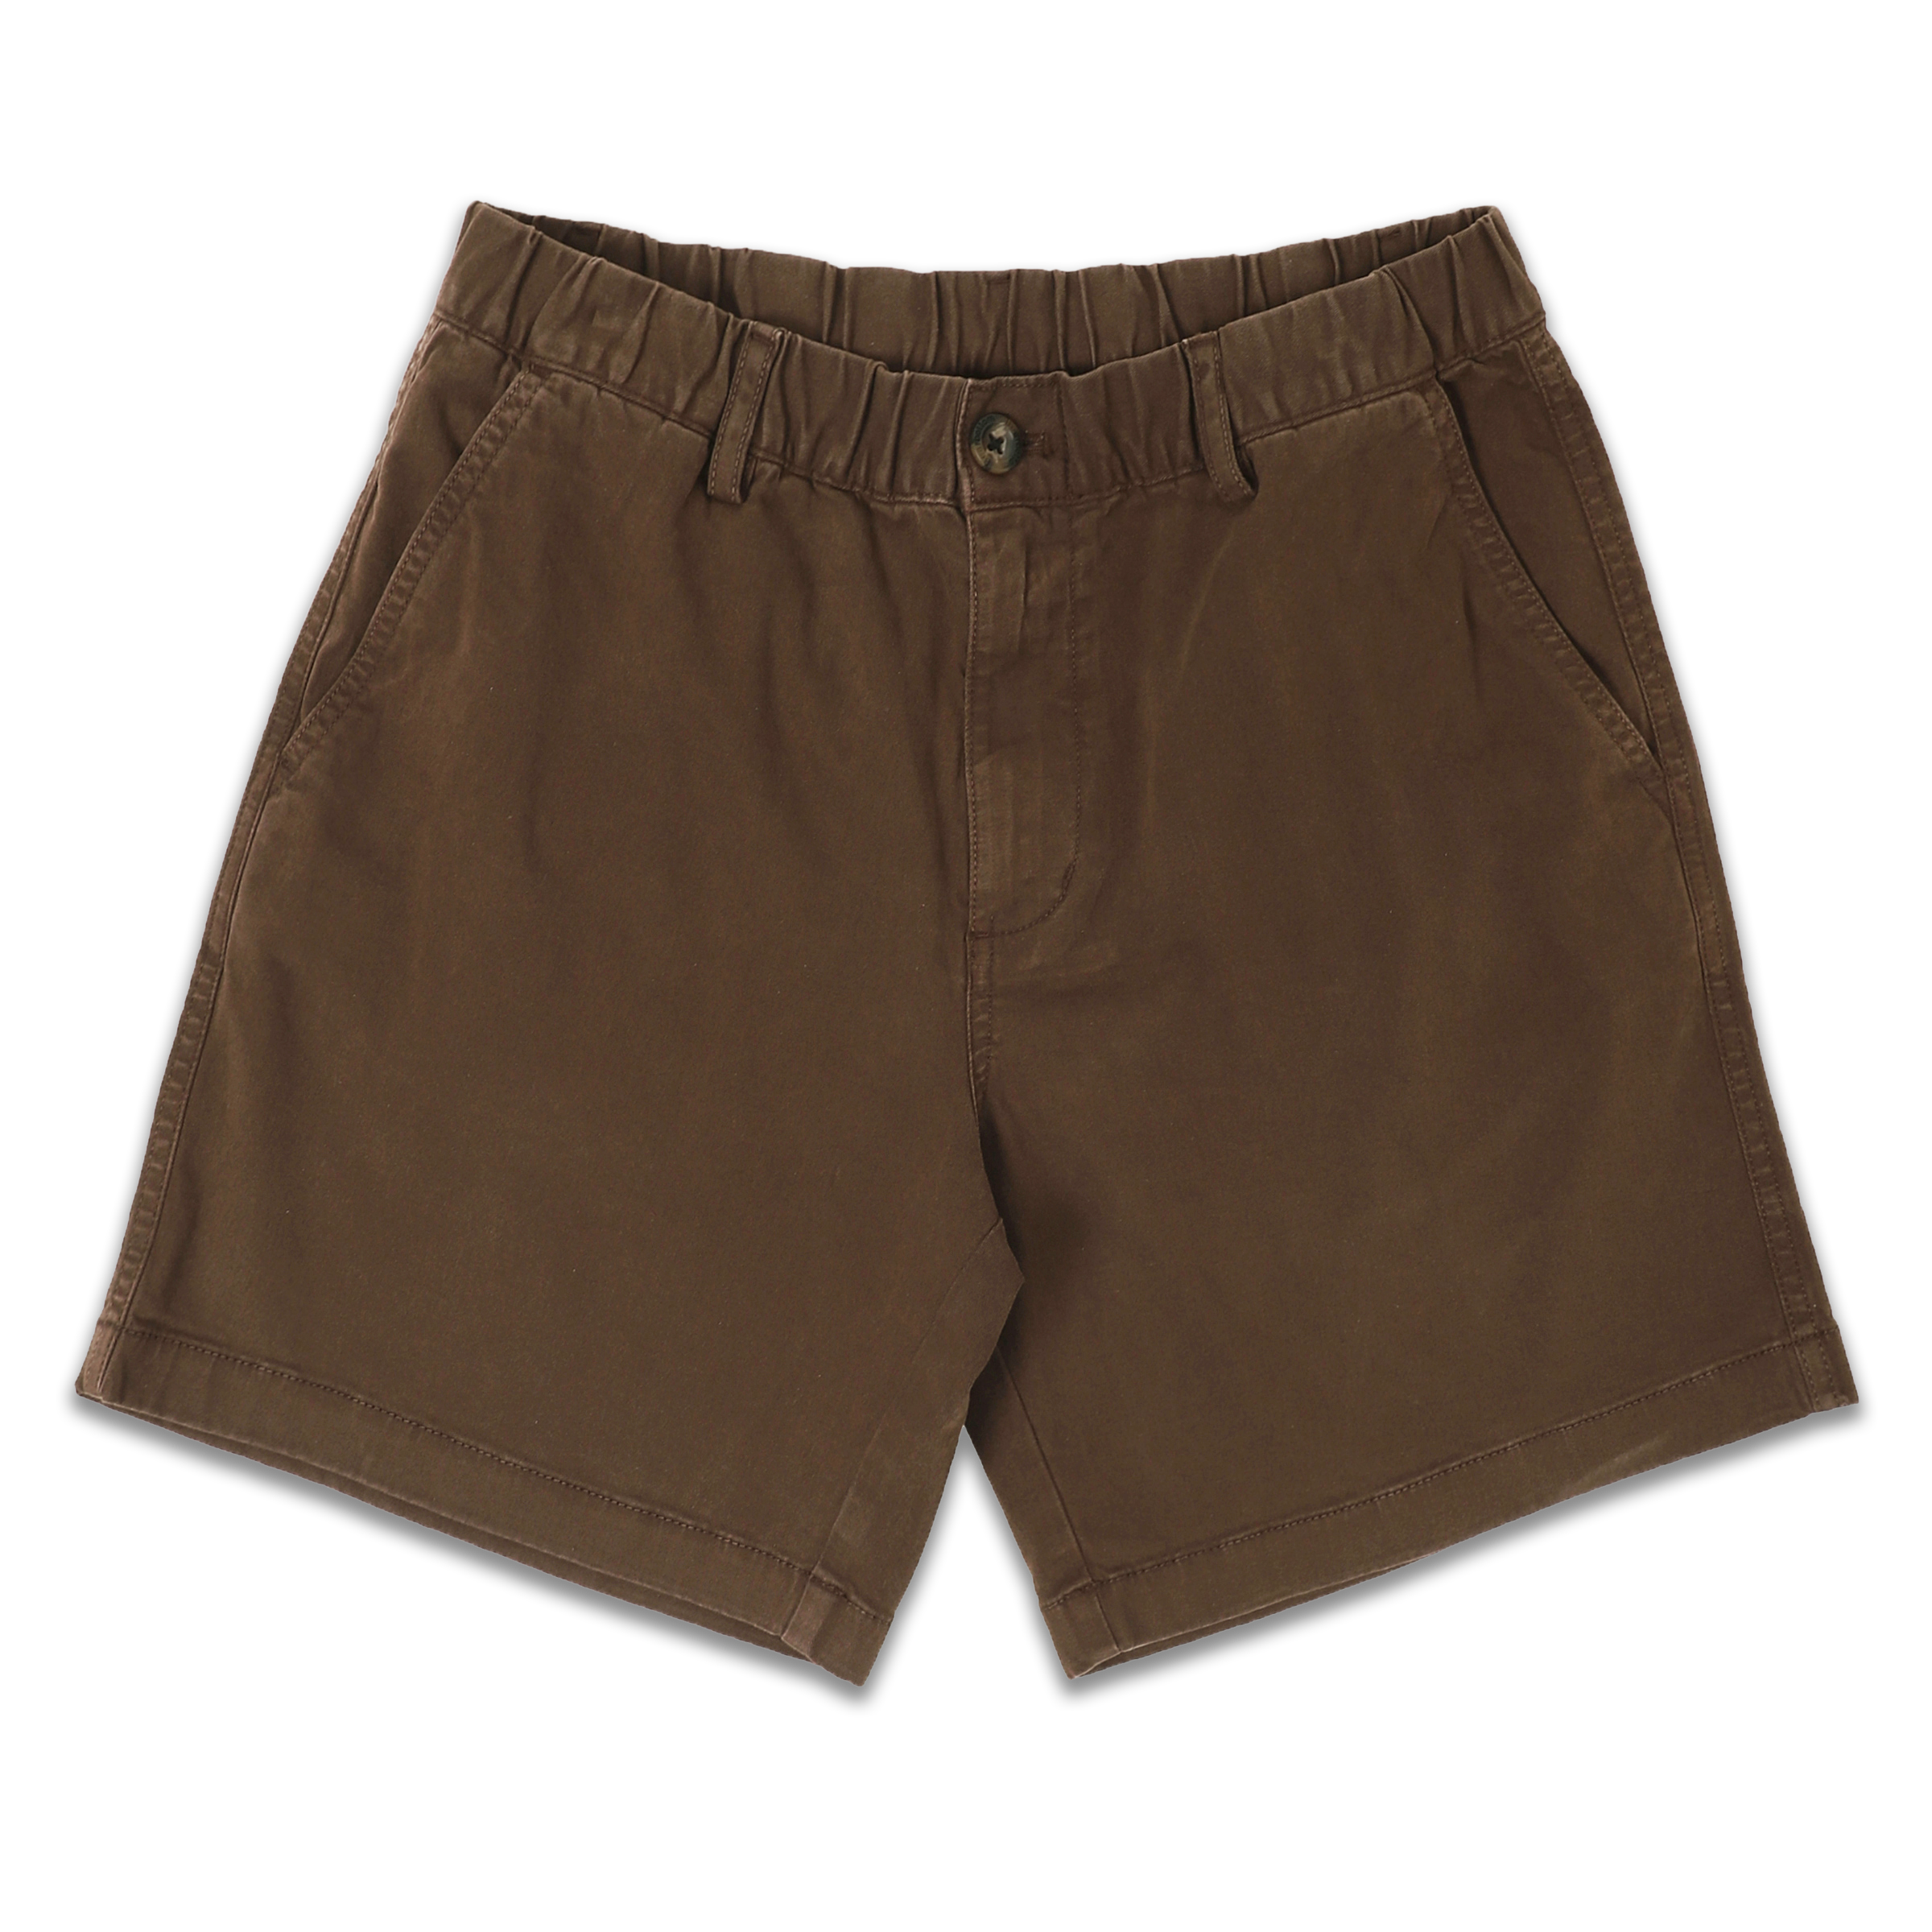 Stretch Short 7" Cocoa front with elastic waistband, belt loops, zipper fly, faux horn button, and two inseam pockets